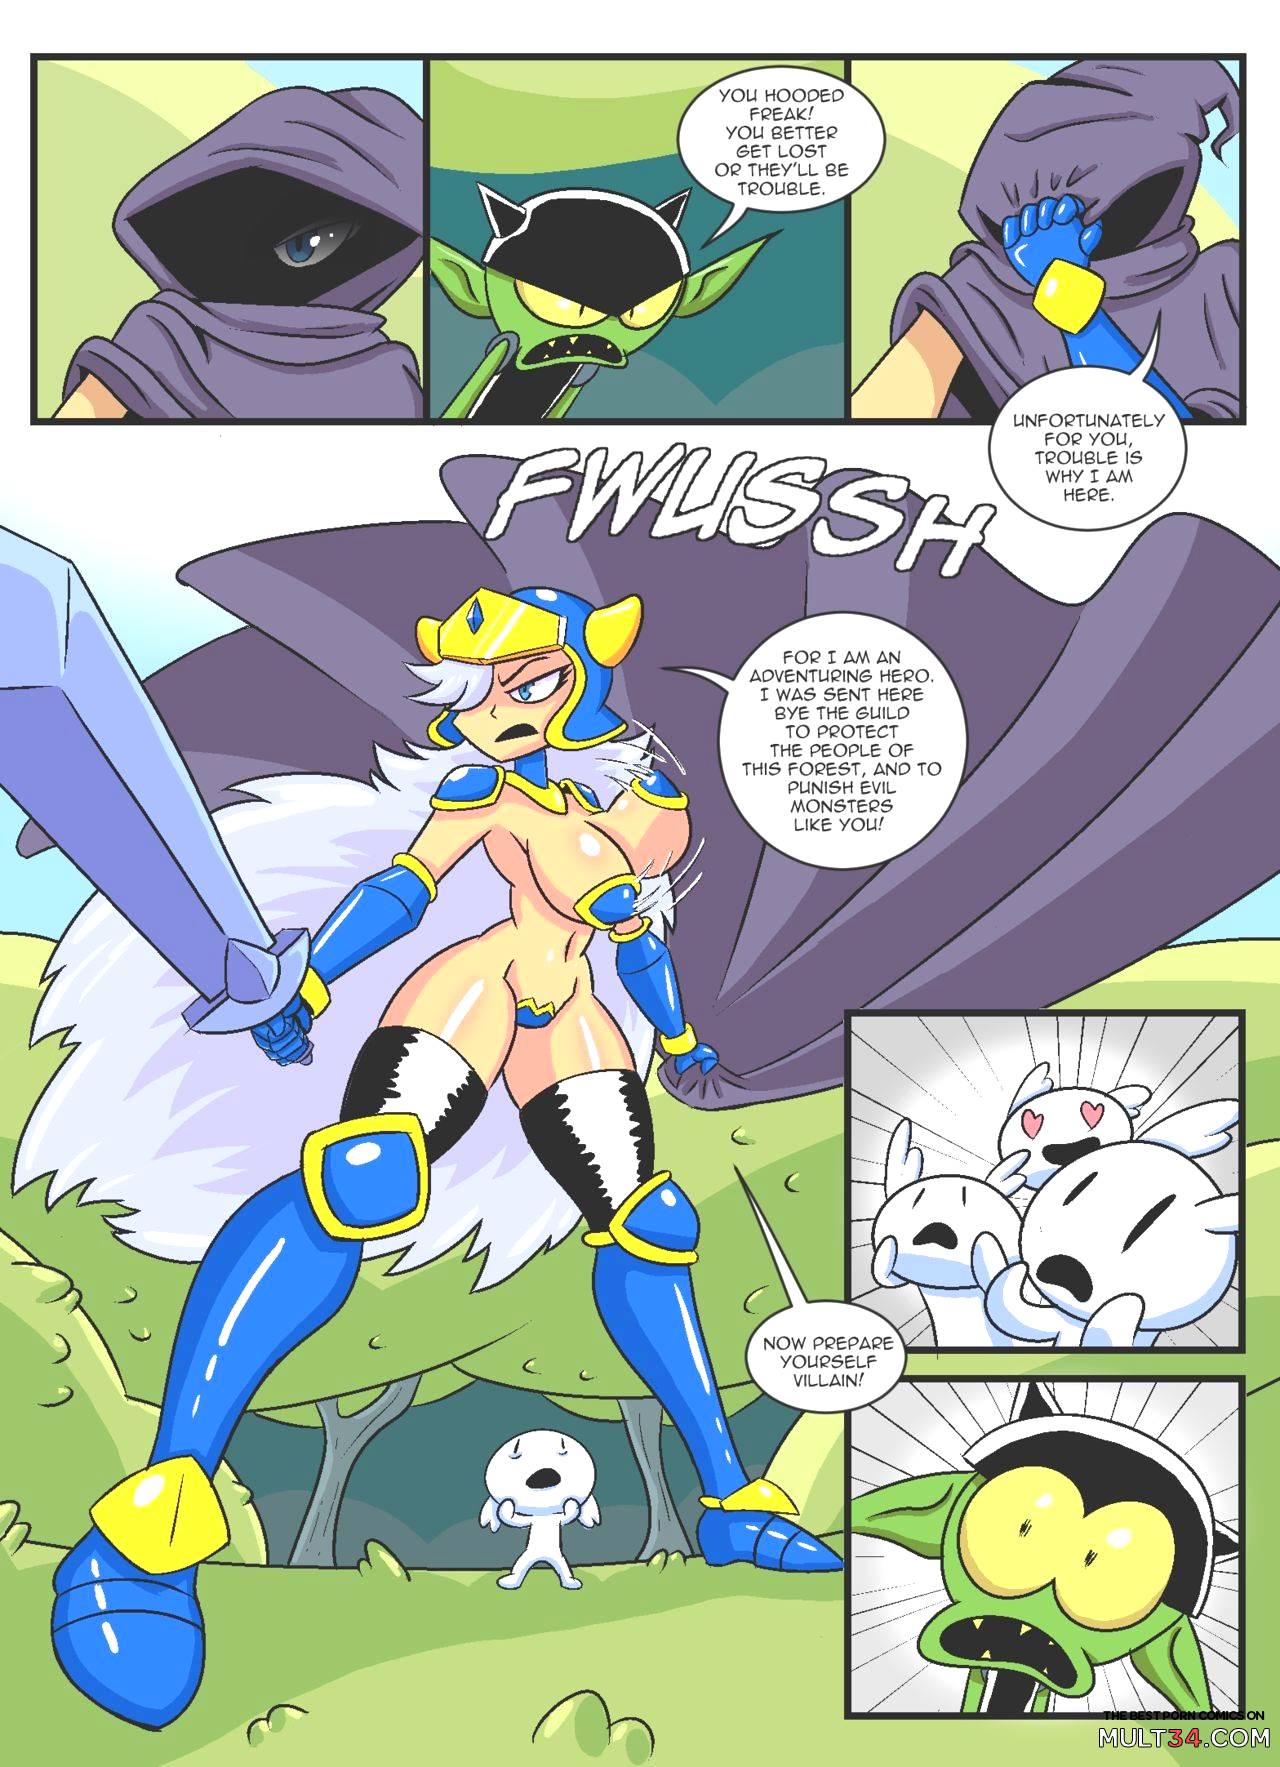 Booby Quest 1-4 page 4